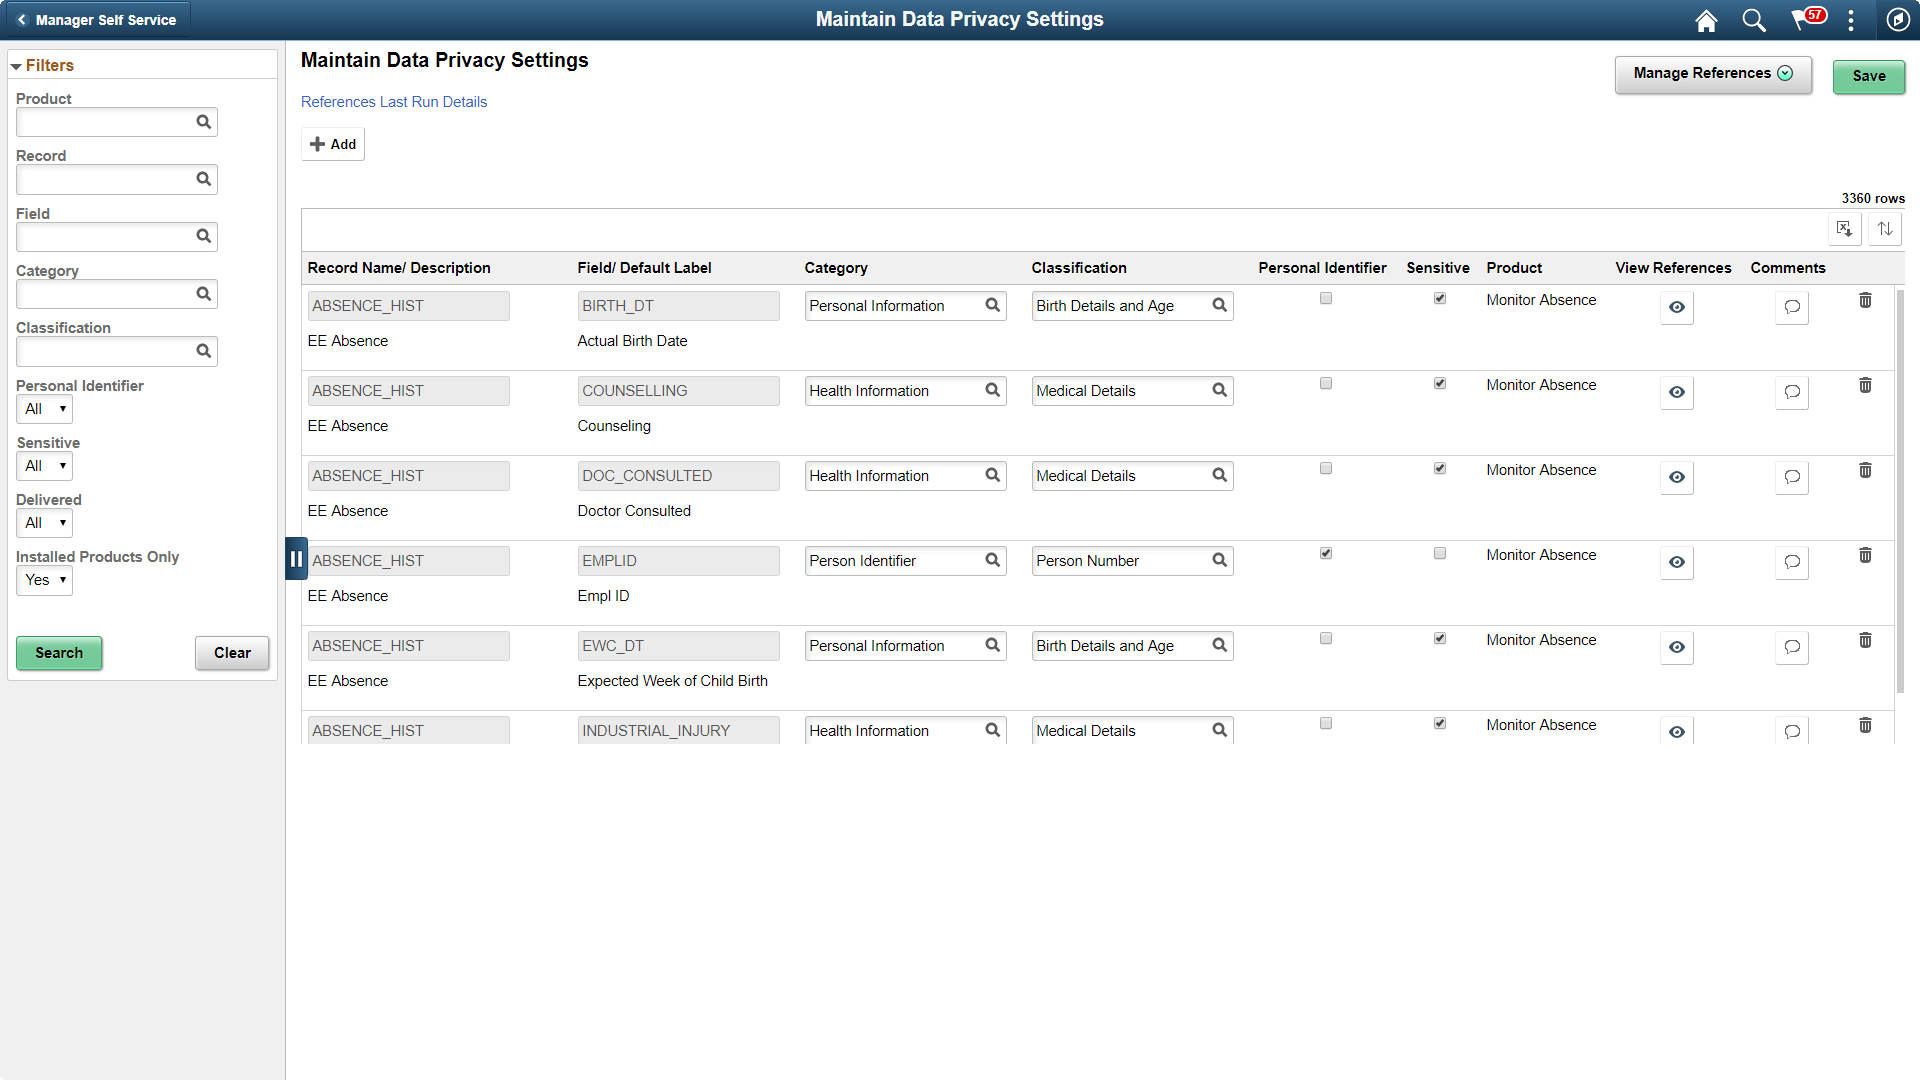 Maintain Data Privacy Settings Page